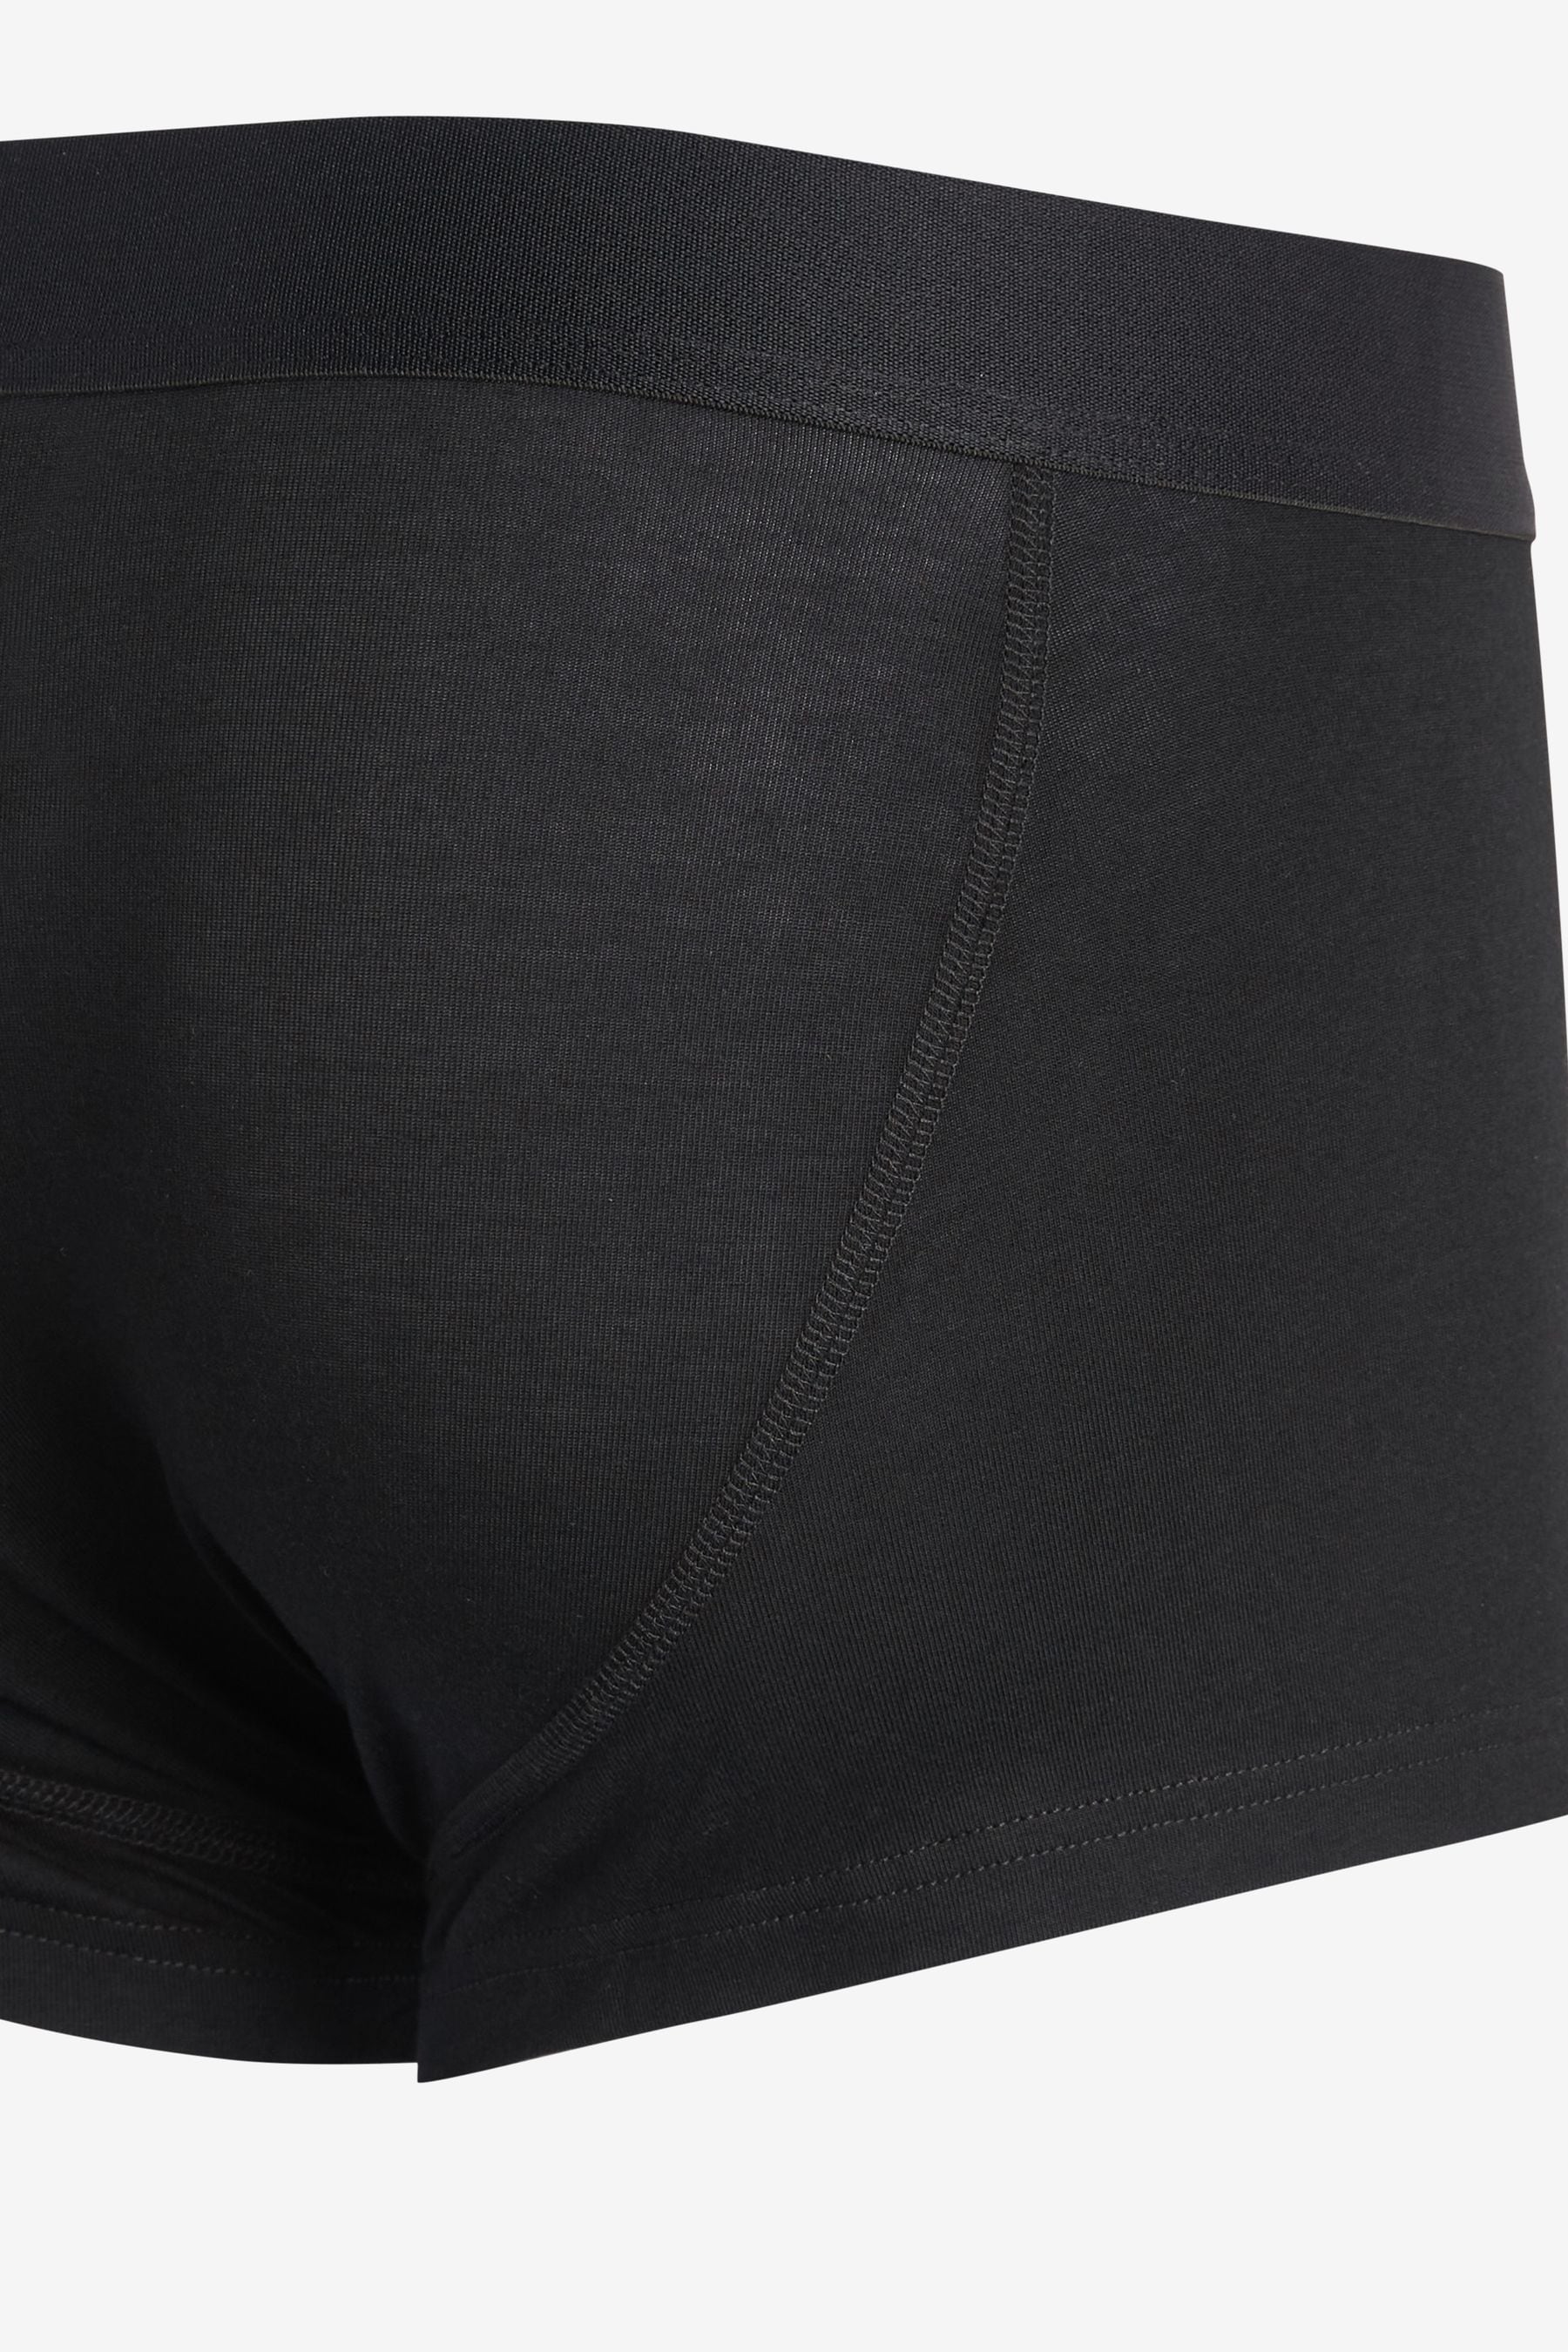 Buy Signature Black Bamboo 4 pack Hipster Boxers from the Next UK ...